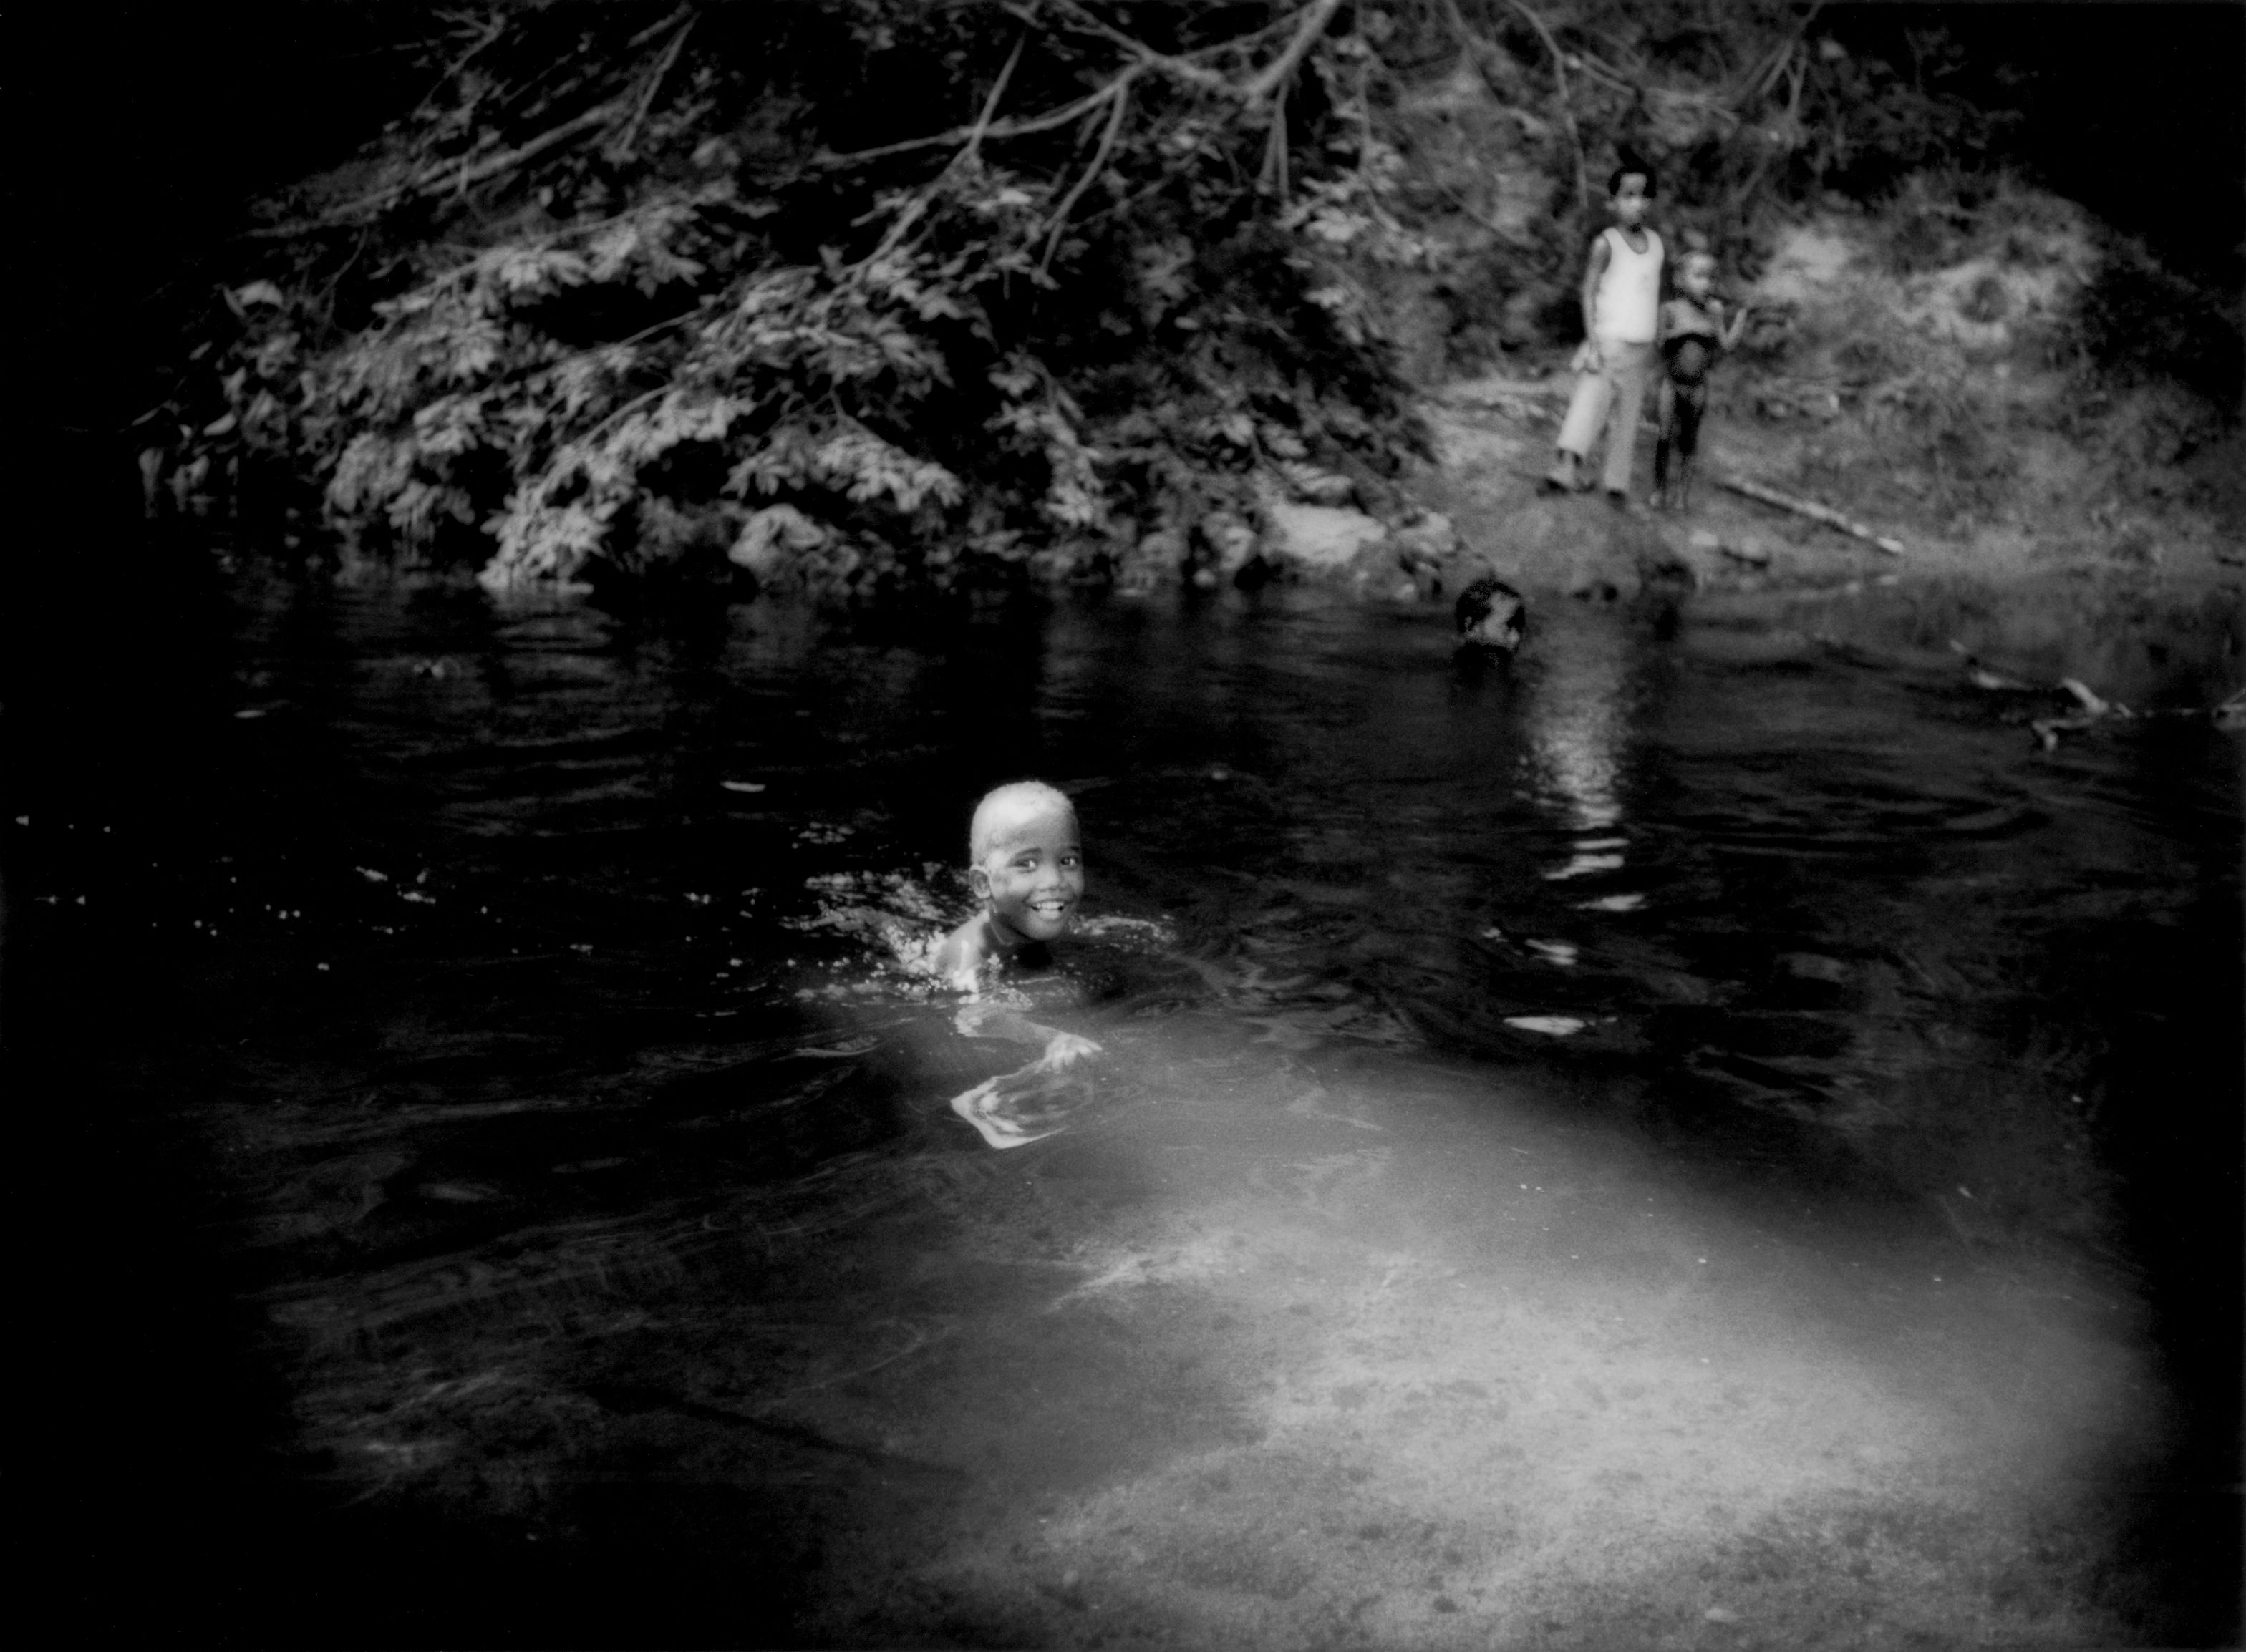 A little Batek boy swims in the river. Image by James Whitlow Delano. Malaysia, 2011.